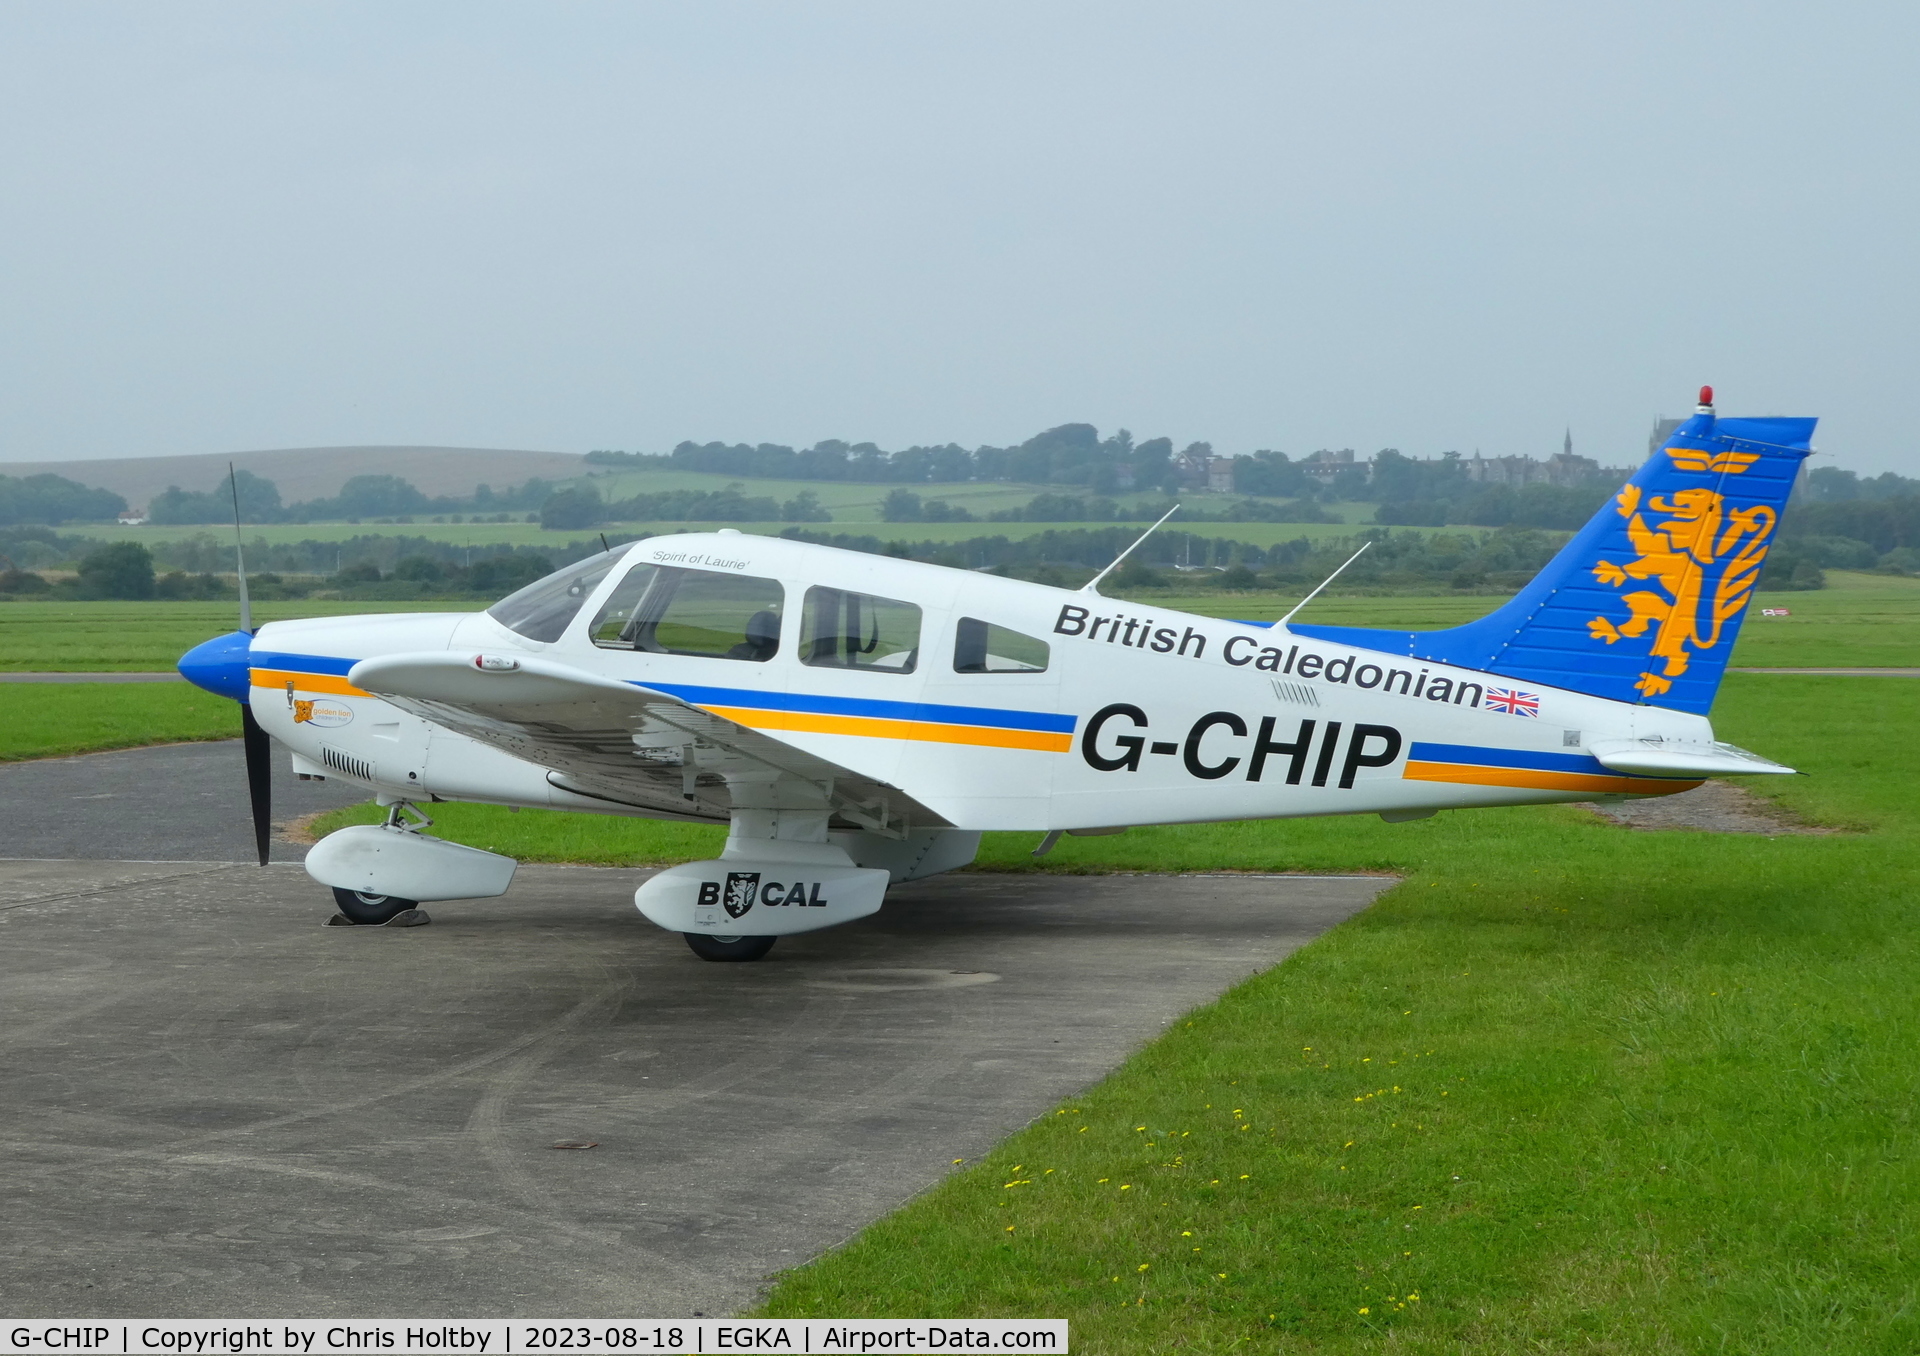 G-CHIP, 1982 Piper PA-28-181 Cherokee Archer II C/N 28-8290095, Smart Cherokee Archer II parked at its base at Shoreham Airport, W Sussex